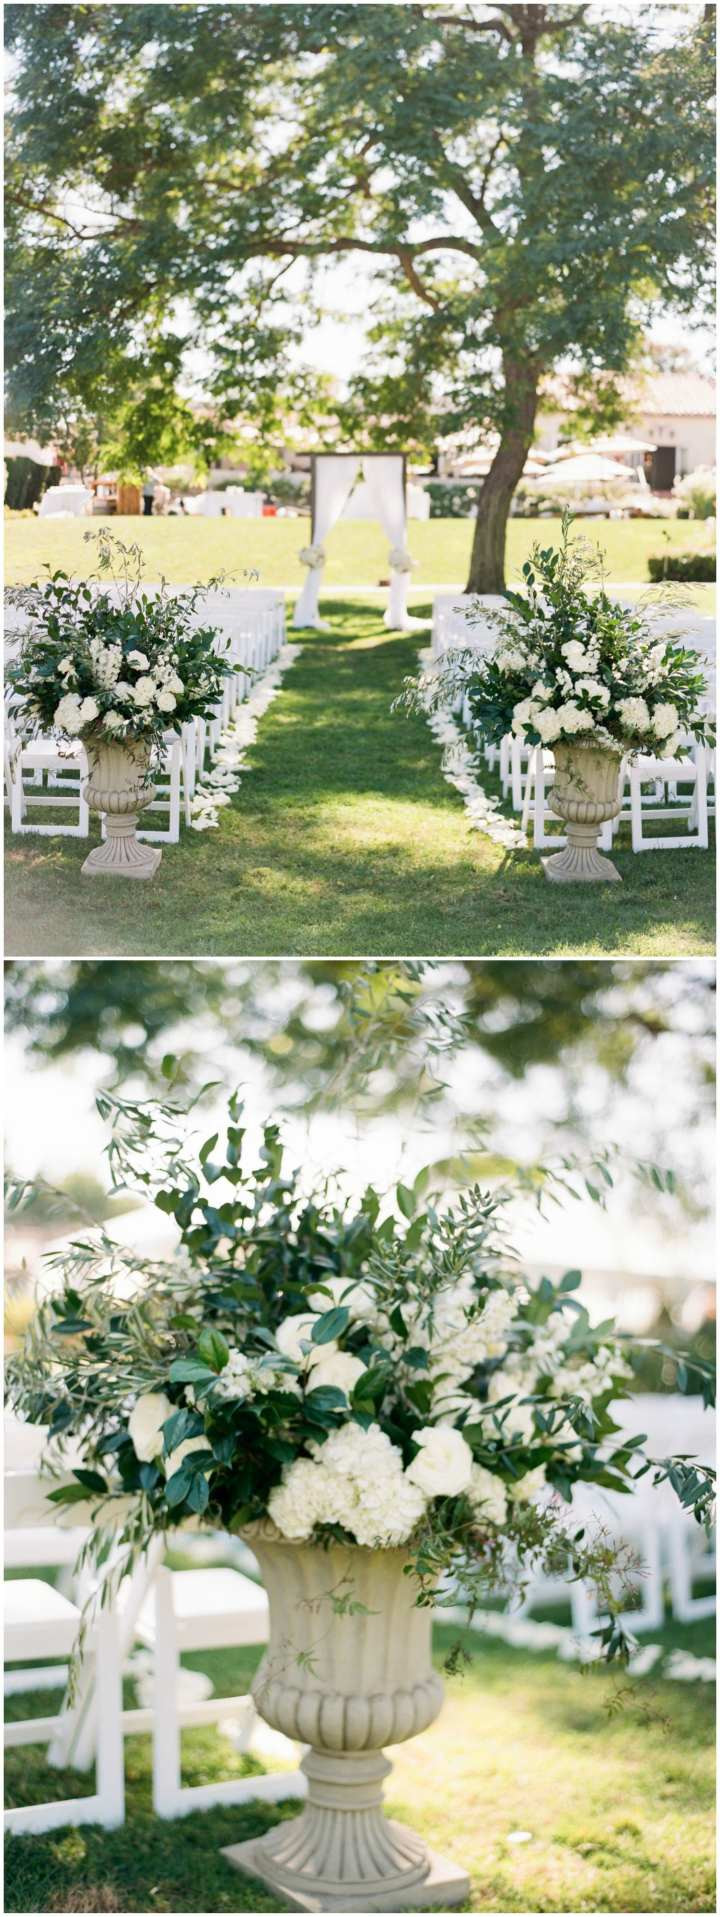 13 Wonderful Target Gold Vase 2024 free download target gold vase of outdoor wedding ceremony lovely vases disposable plastic single for outdoor wedding ceremony awesome the smarter way to wed wedding ceremony ideas pinterest of outdoor we